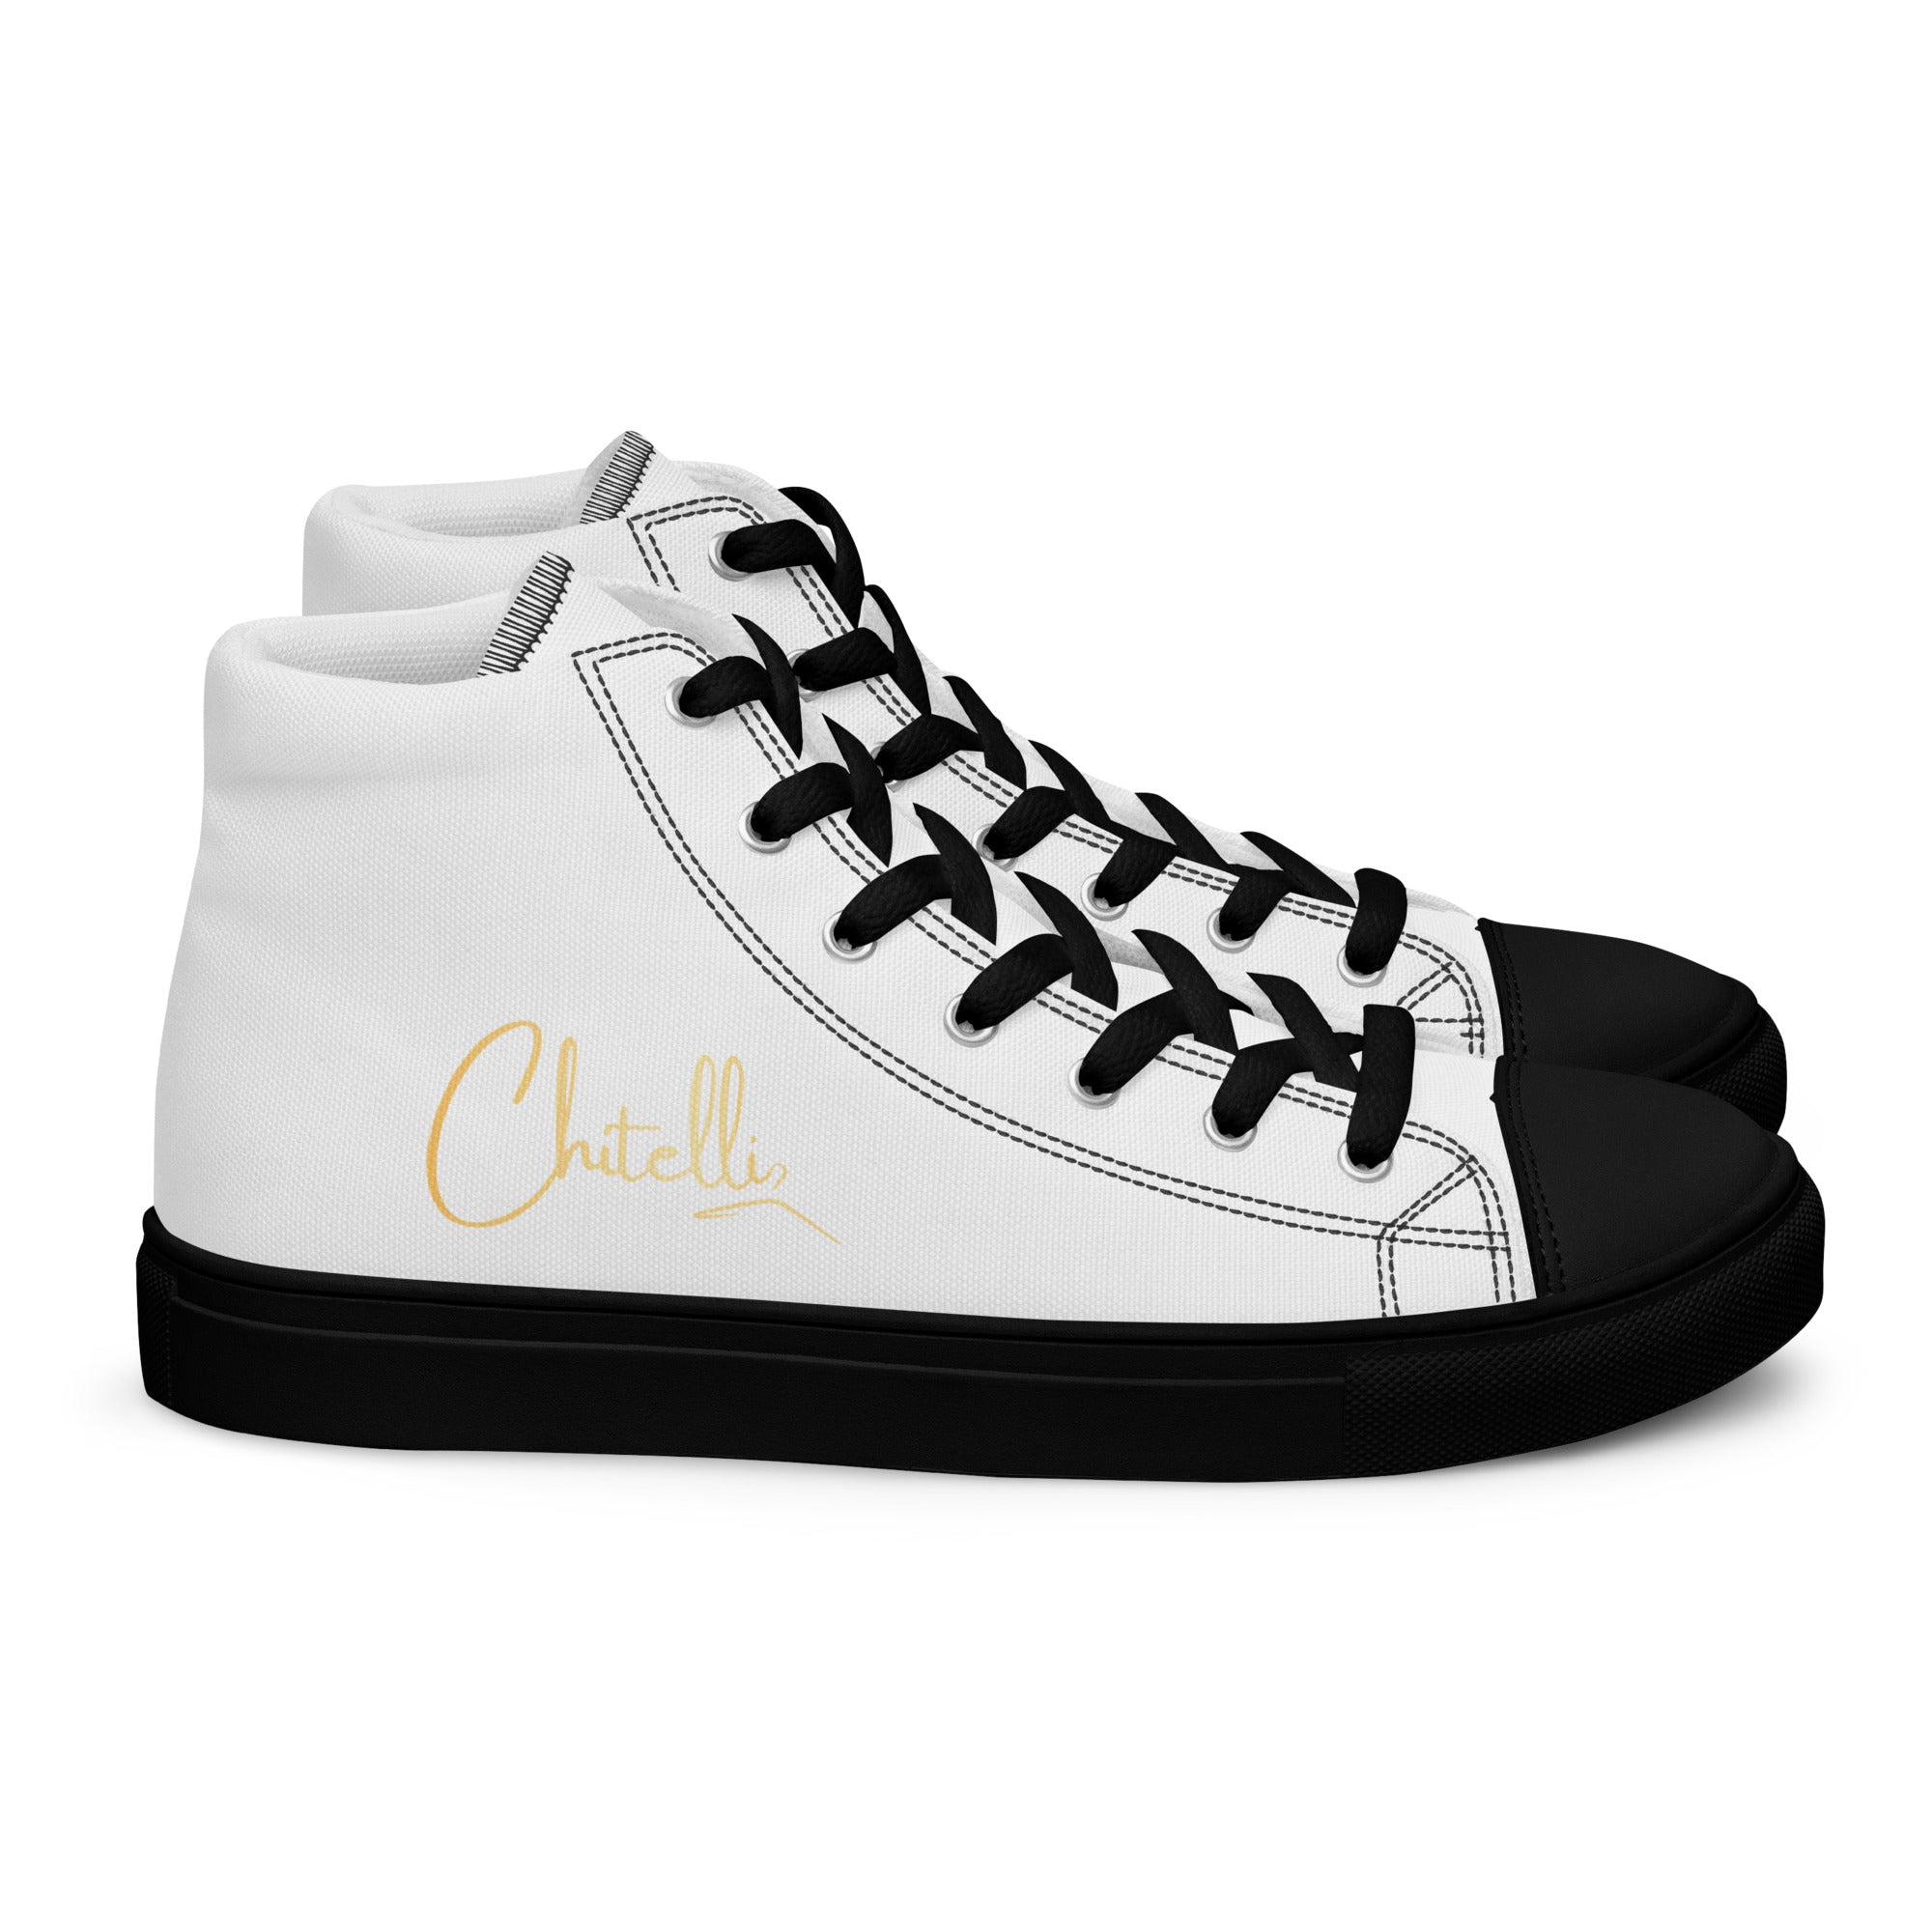 Chitelli's Clean White Women's High Top Sneakers